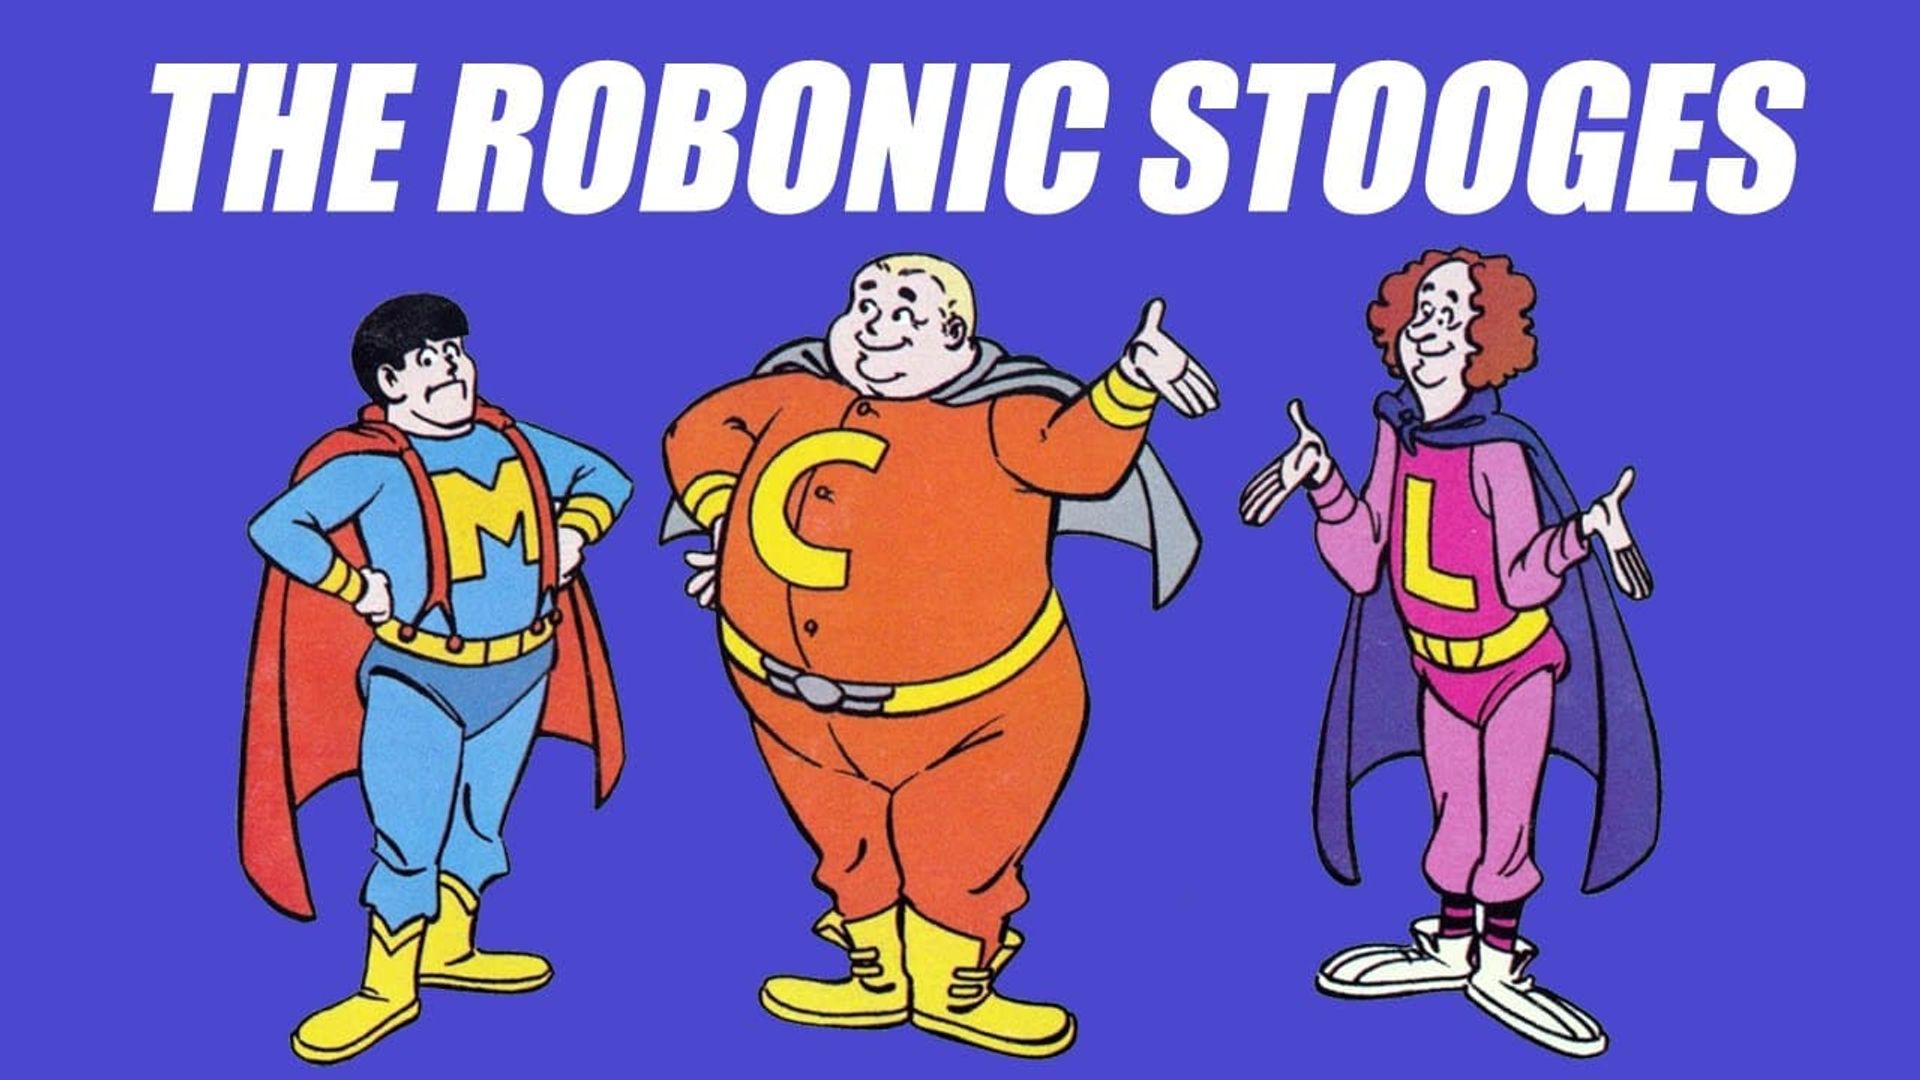 The Robonic Stooges background